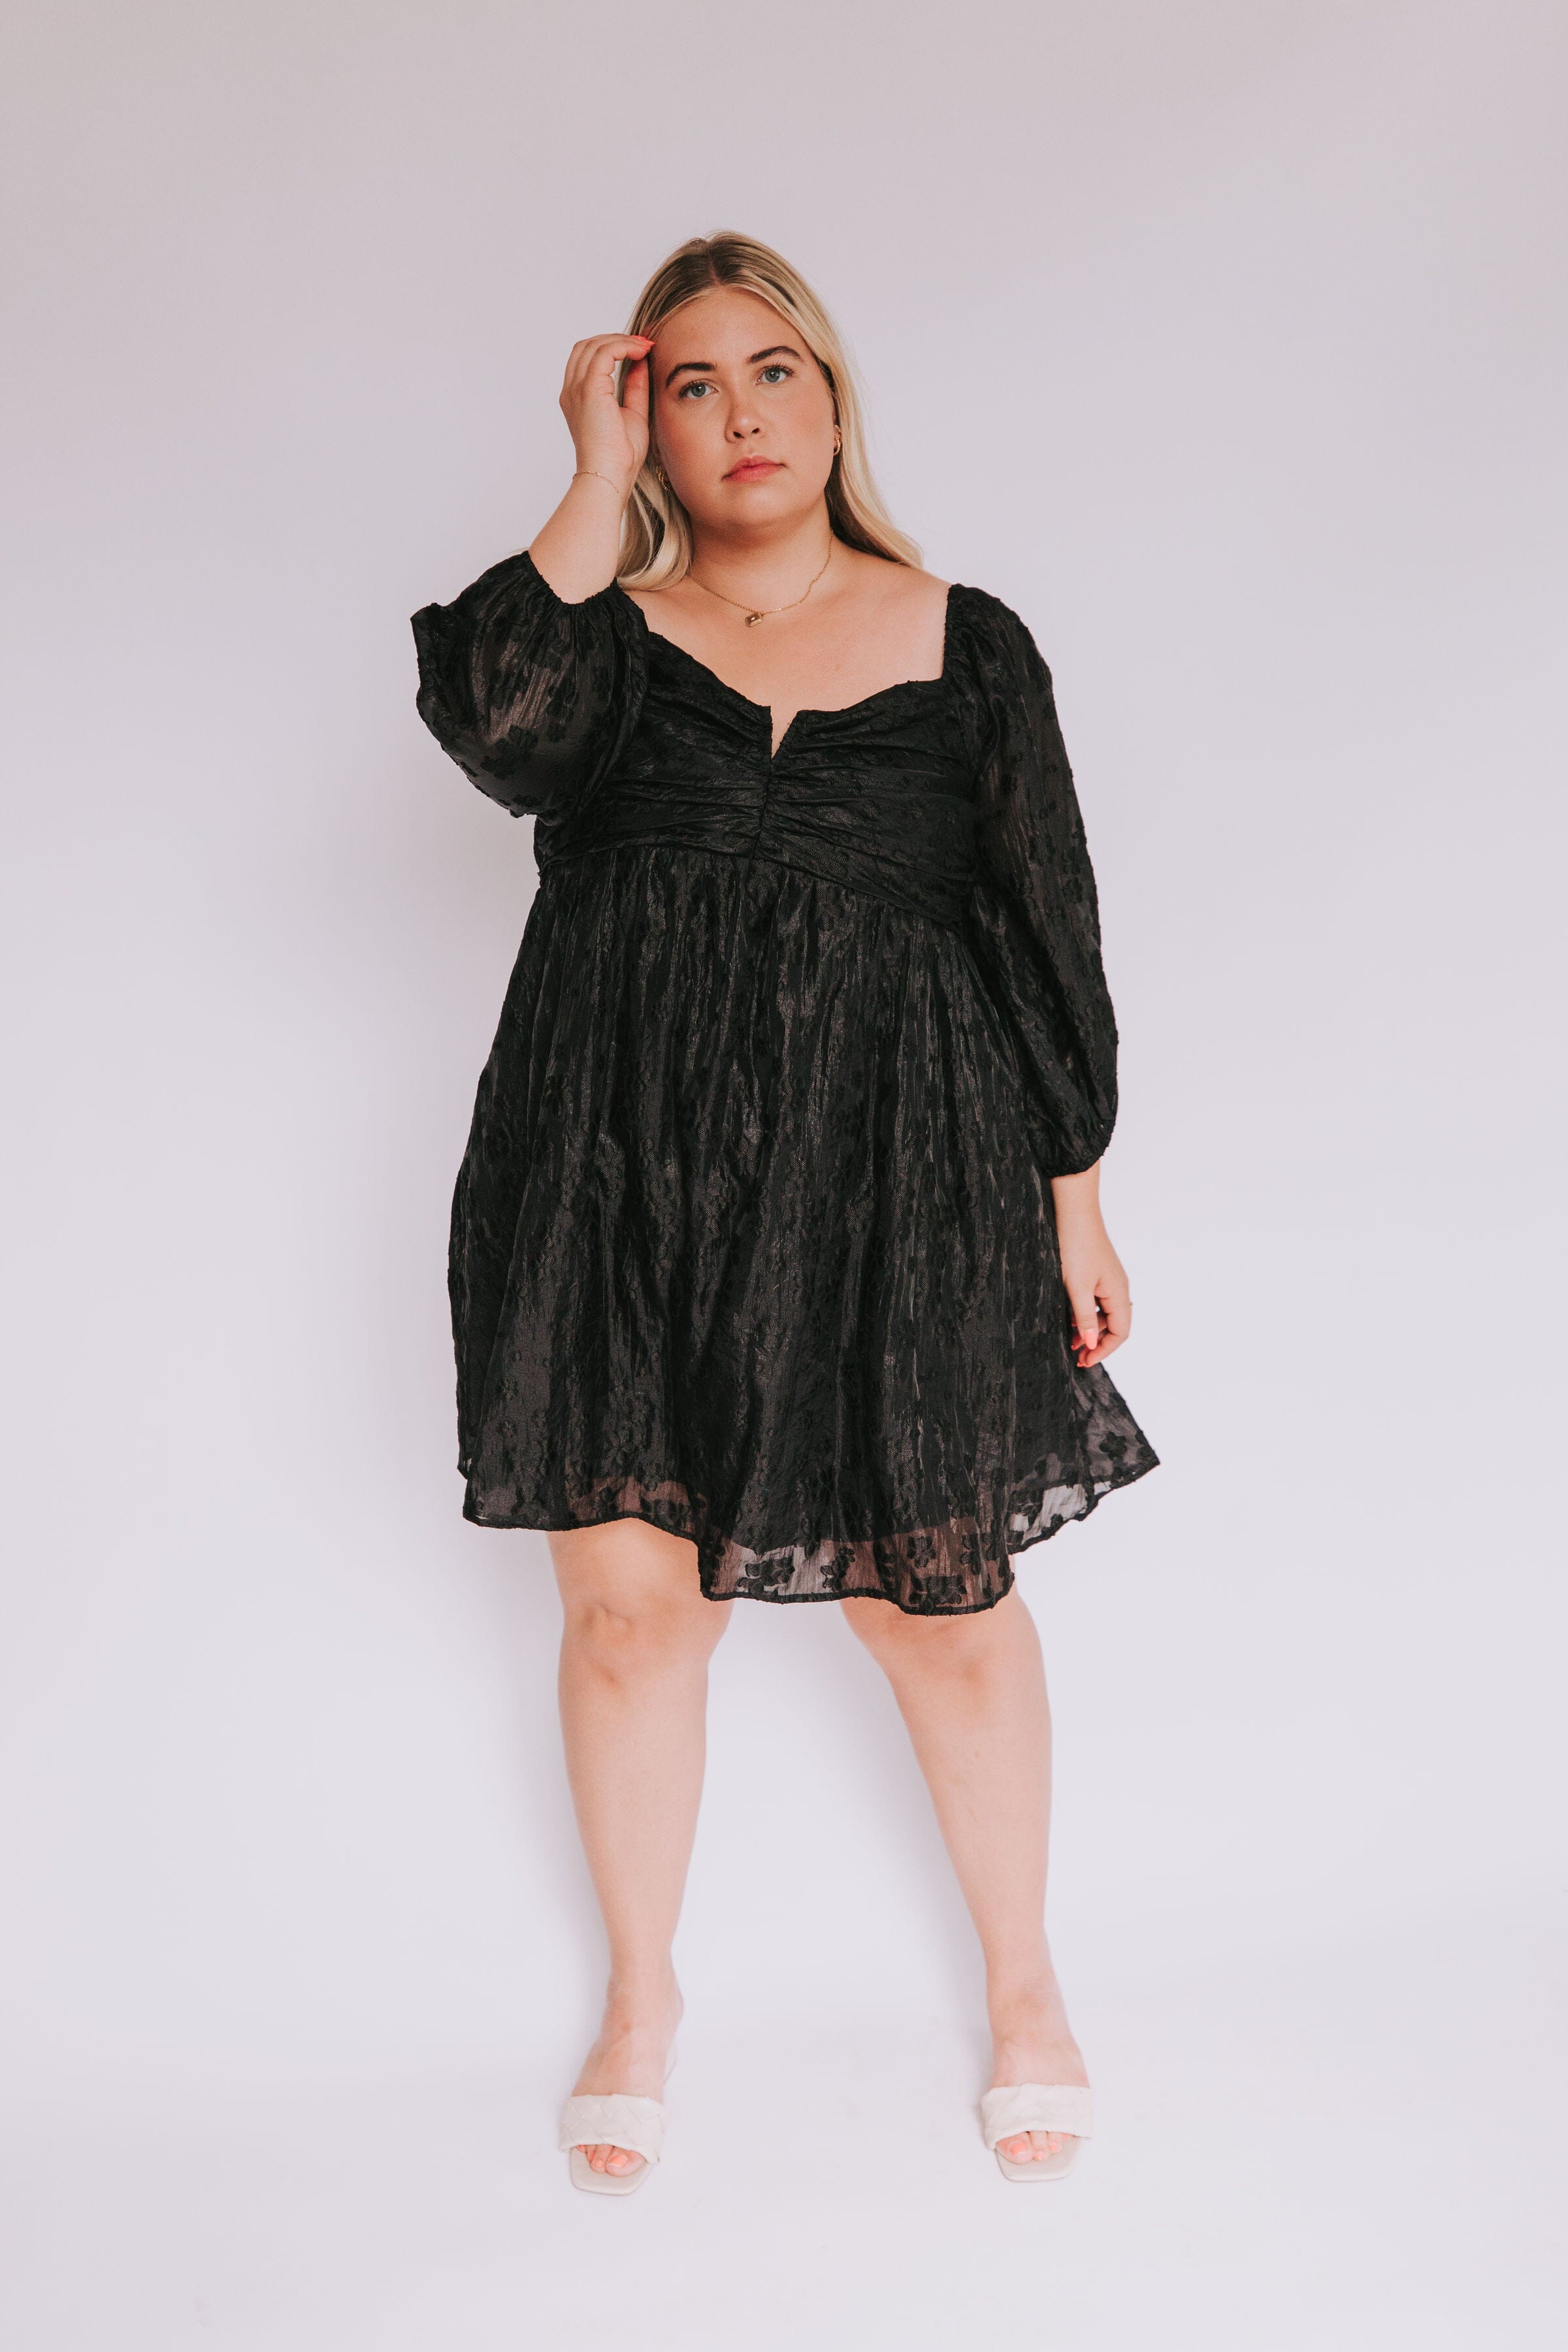 PLUS SIZE - All About You Dress 